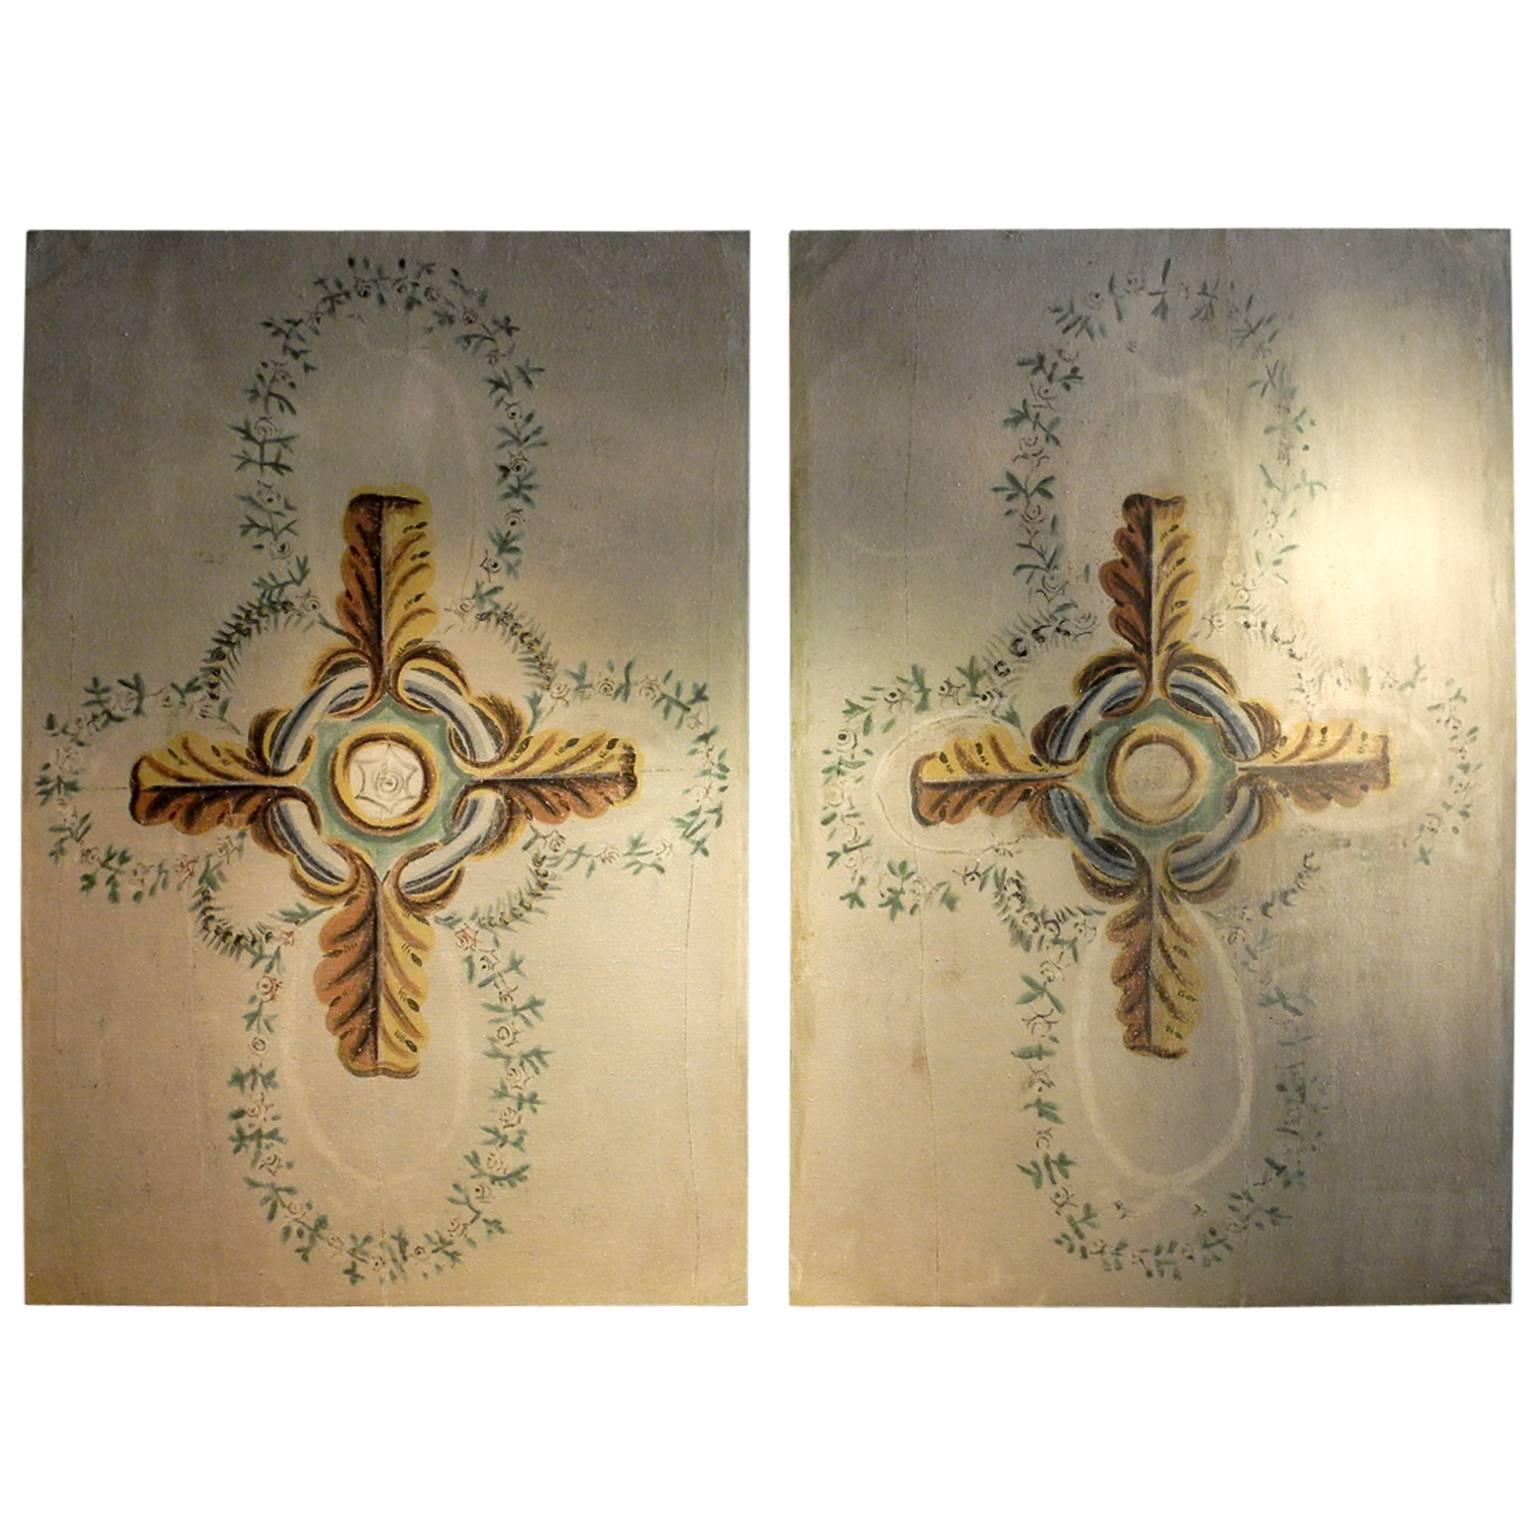 Antique Pair Painted Ceiling Panels with Yellow and Green Details, Circa 1700